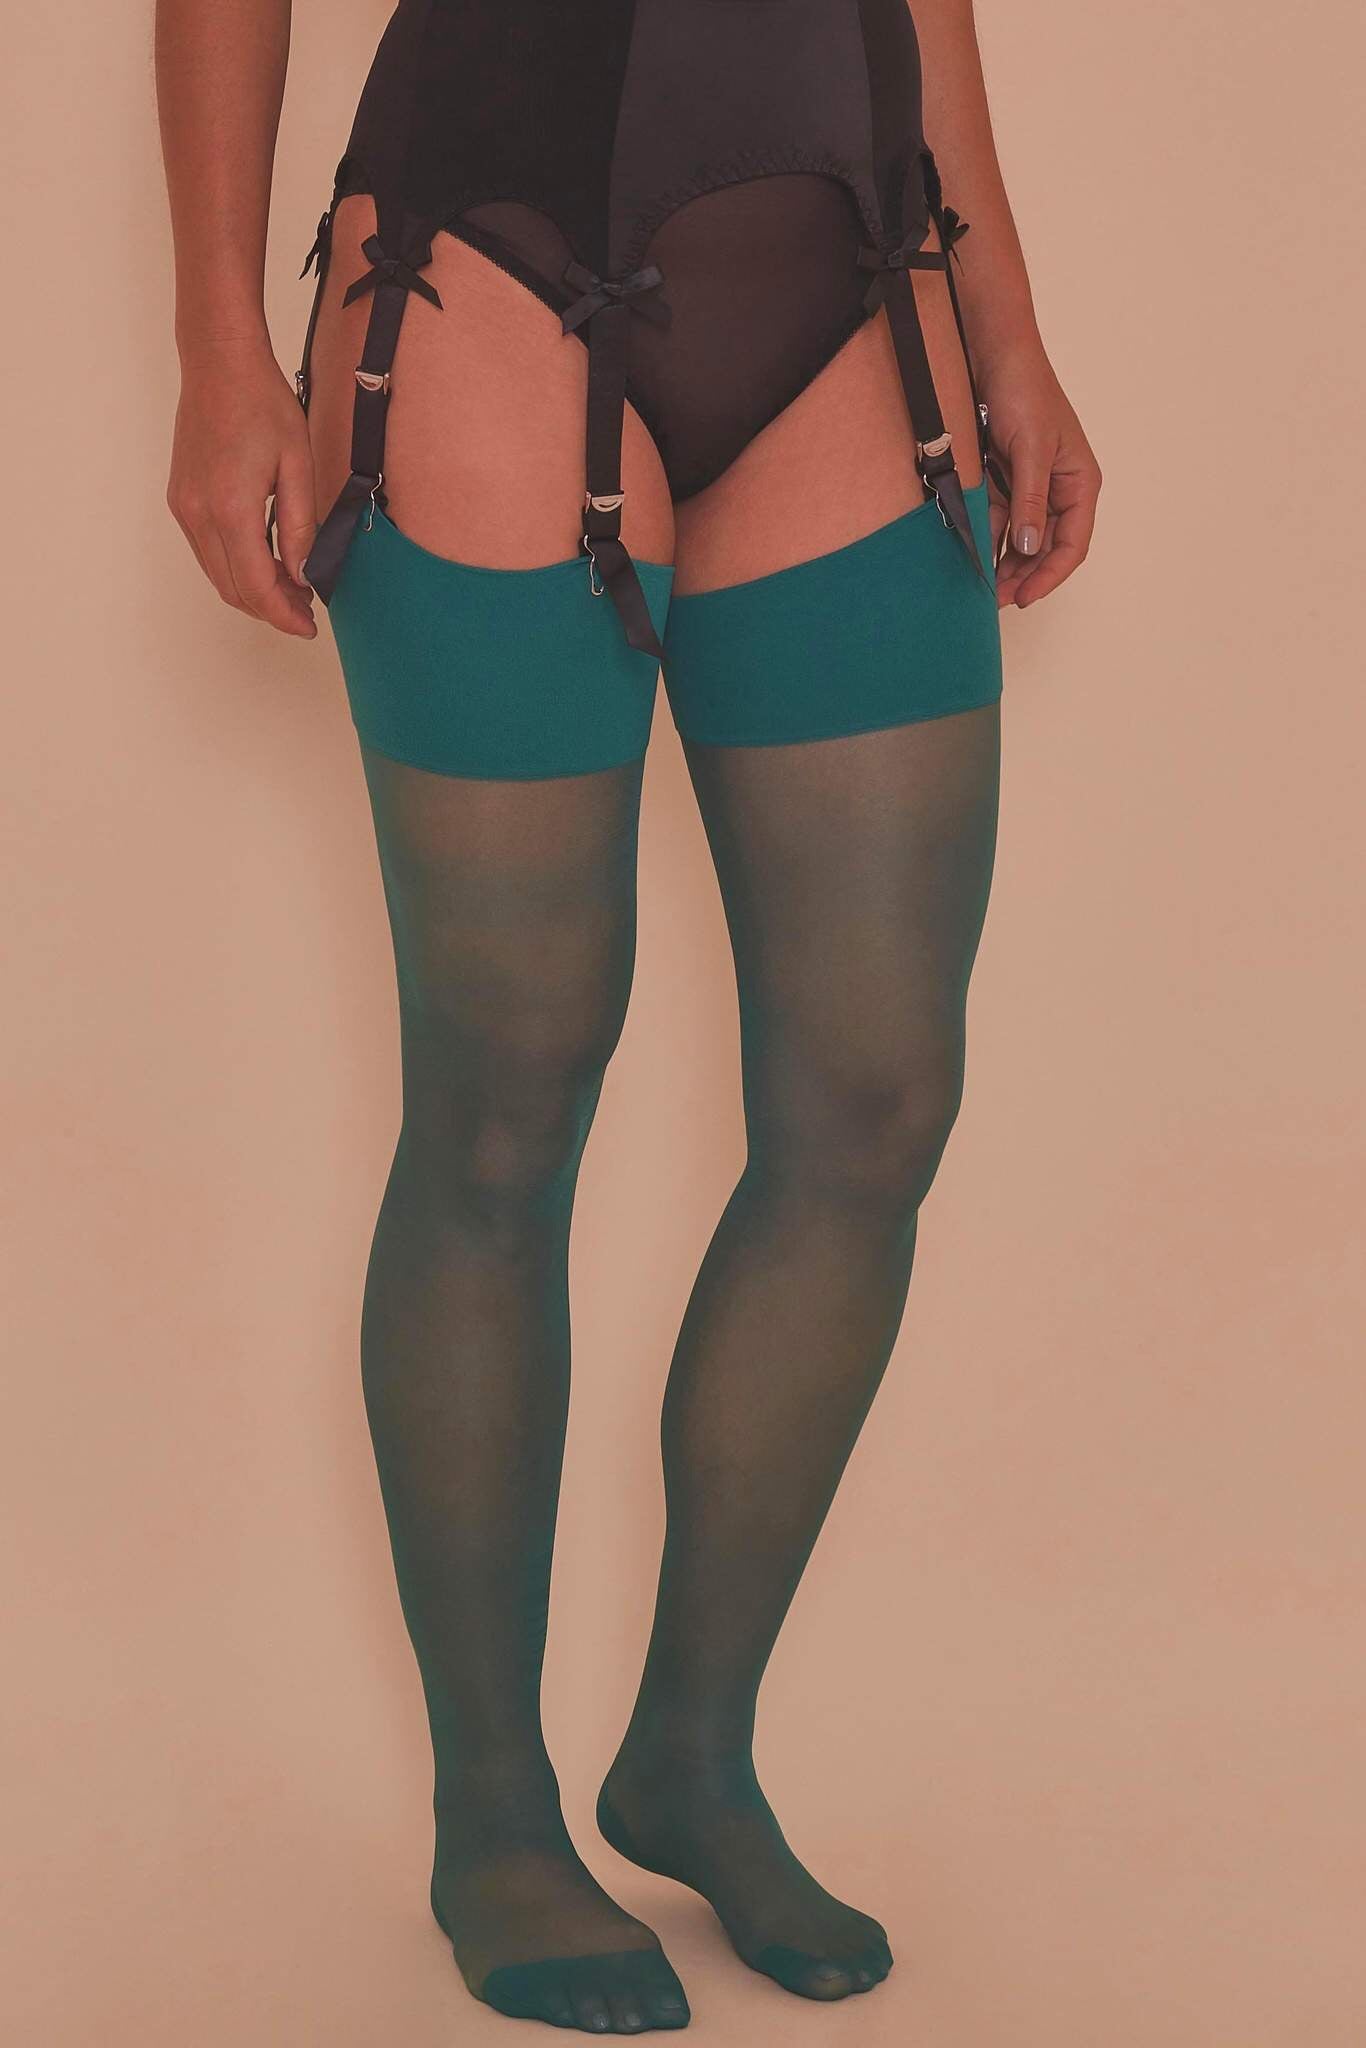 Quetzal Green Seamed Stockings - Size 4-18